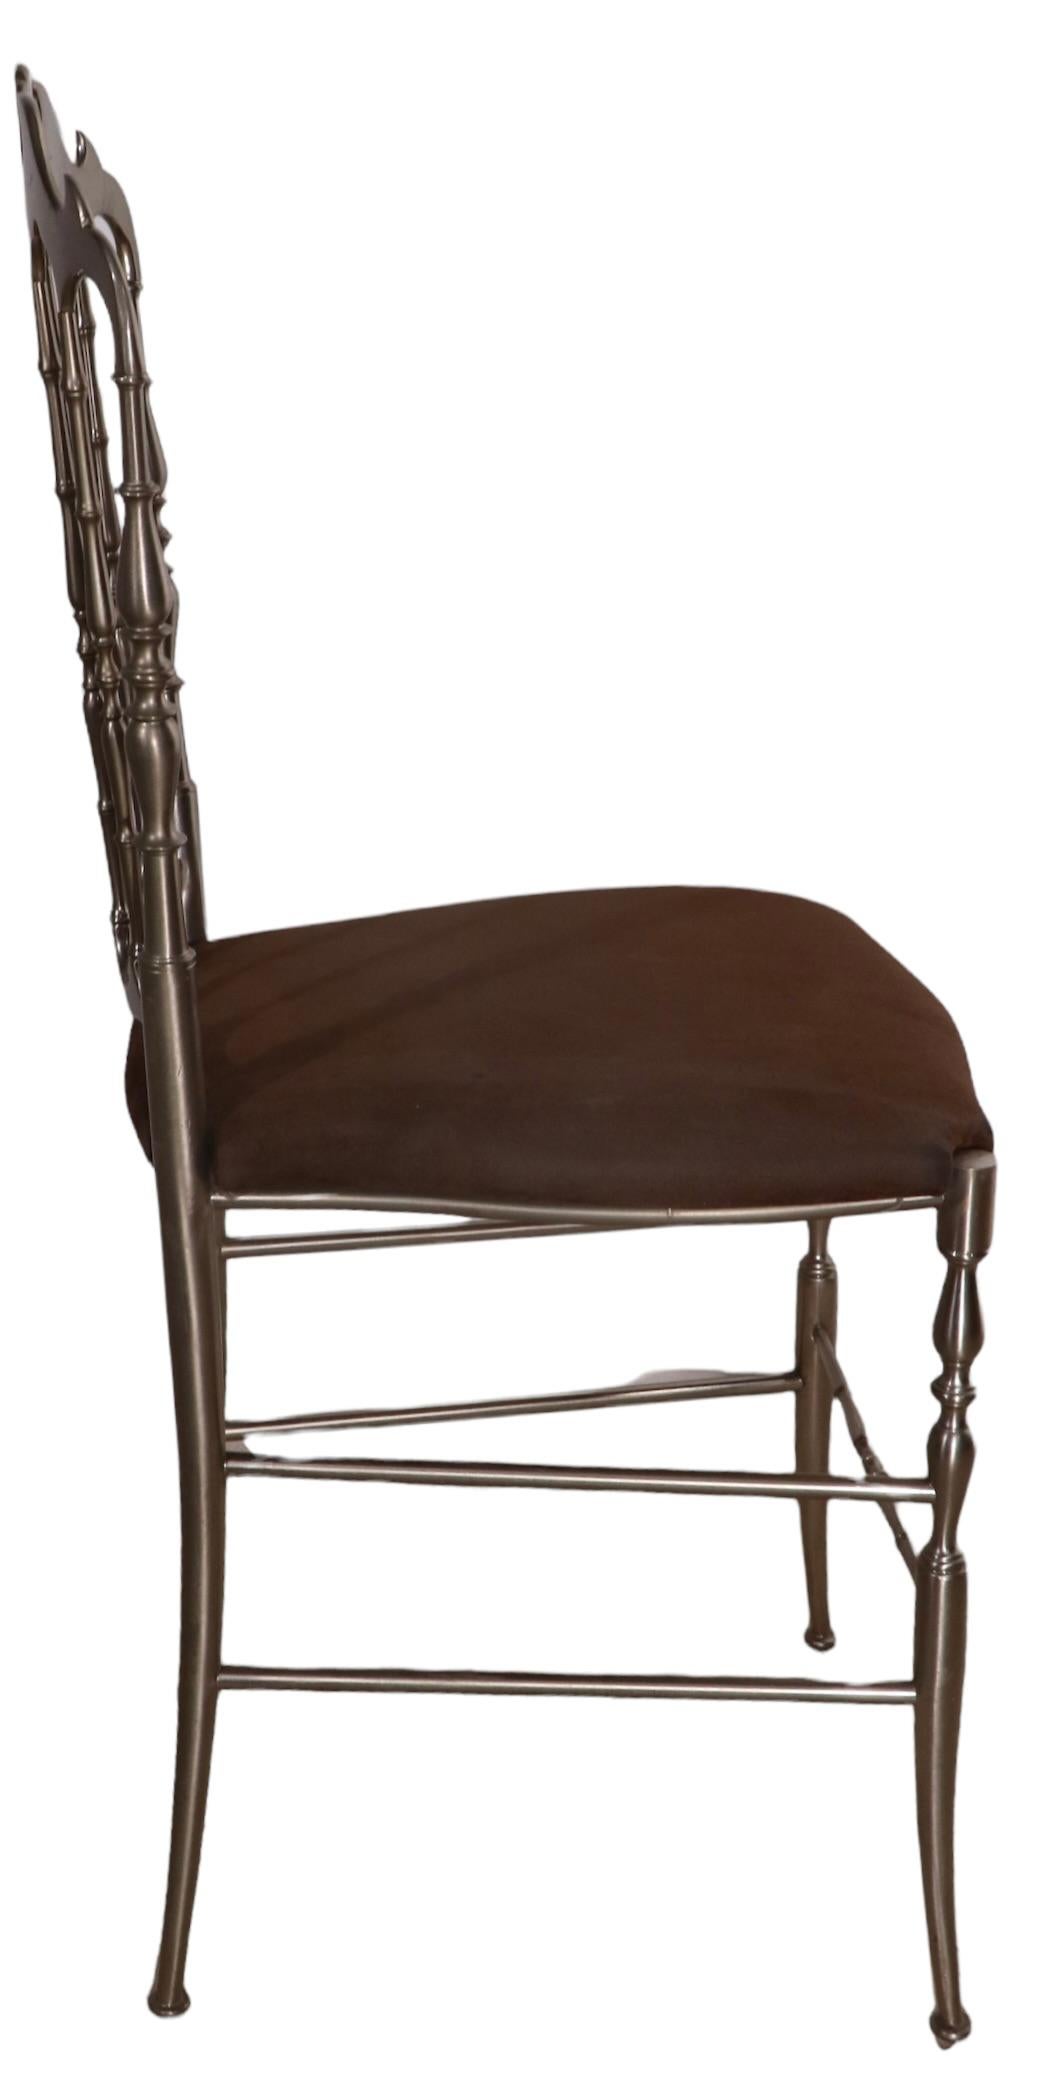 Set of Charivari Chairs in Steel Finish from Made in Italy retailed by WJ Sloane For Sale 1